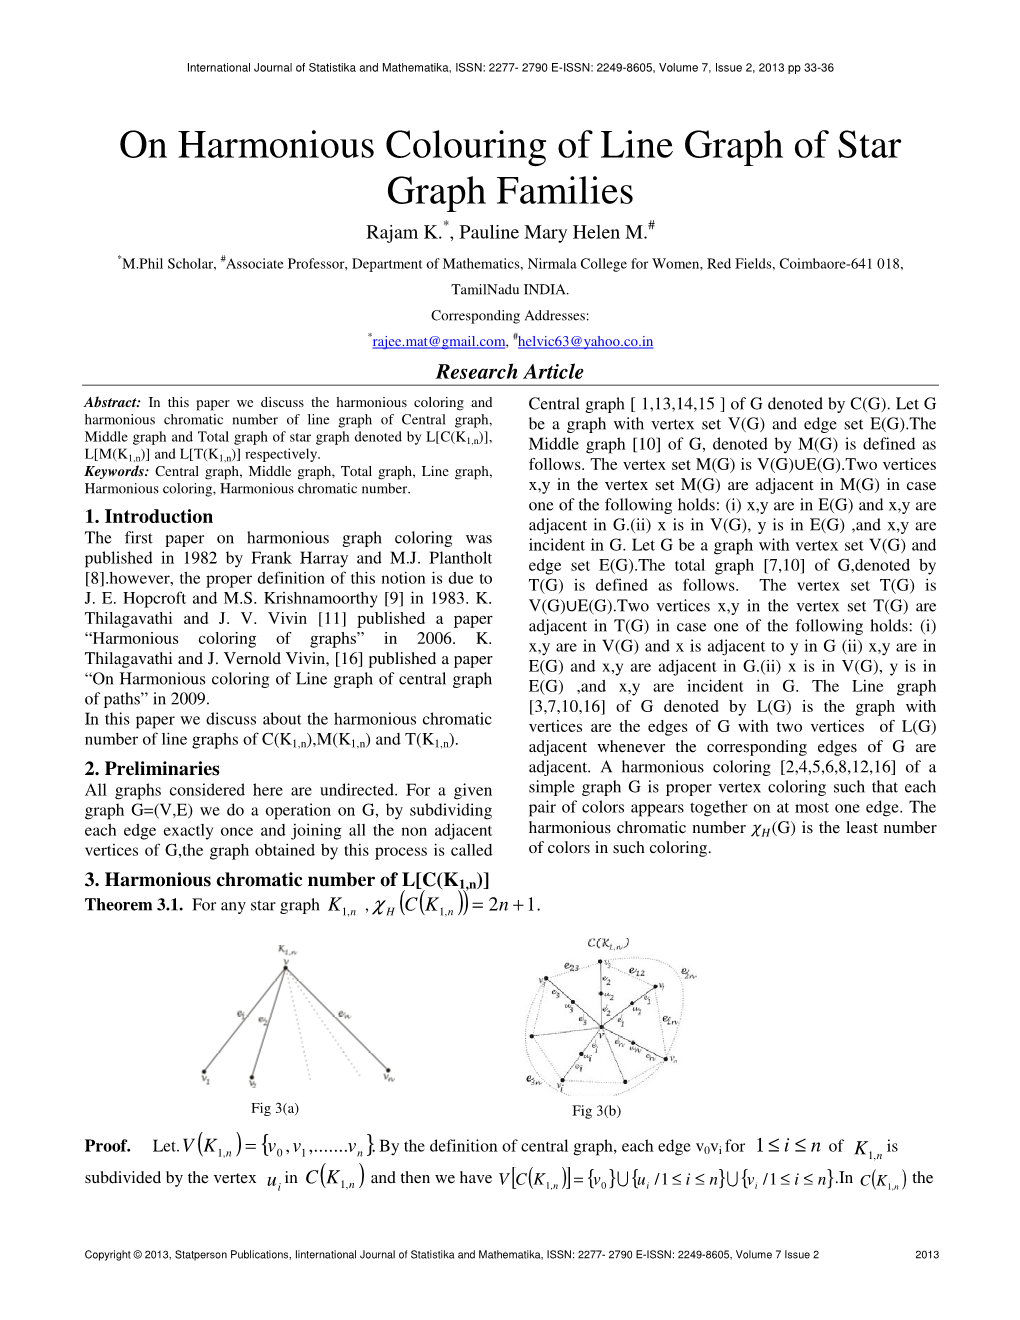 On Harmonious Colouring of Line Graph of Star Graph Families